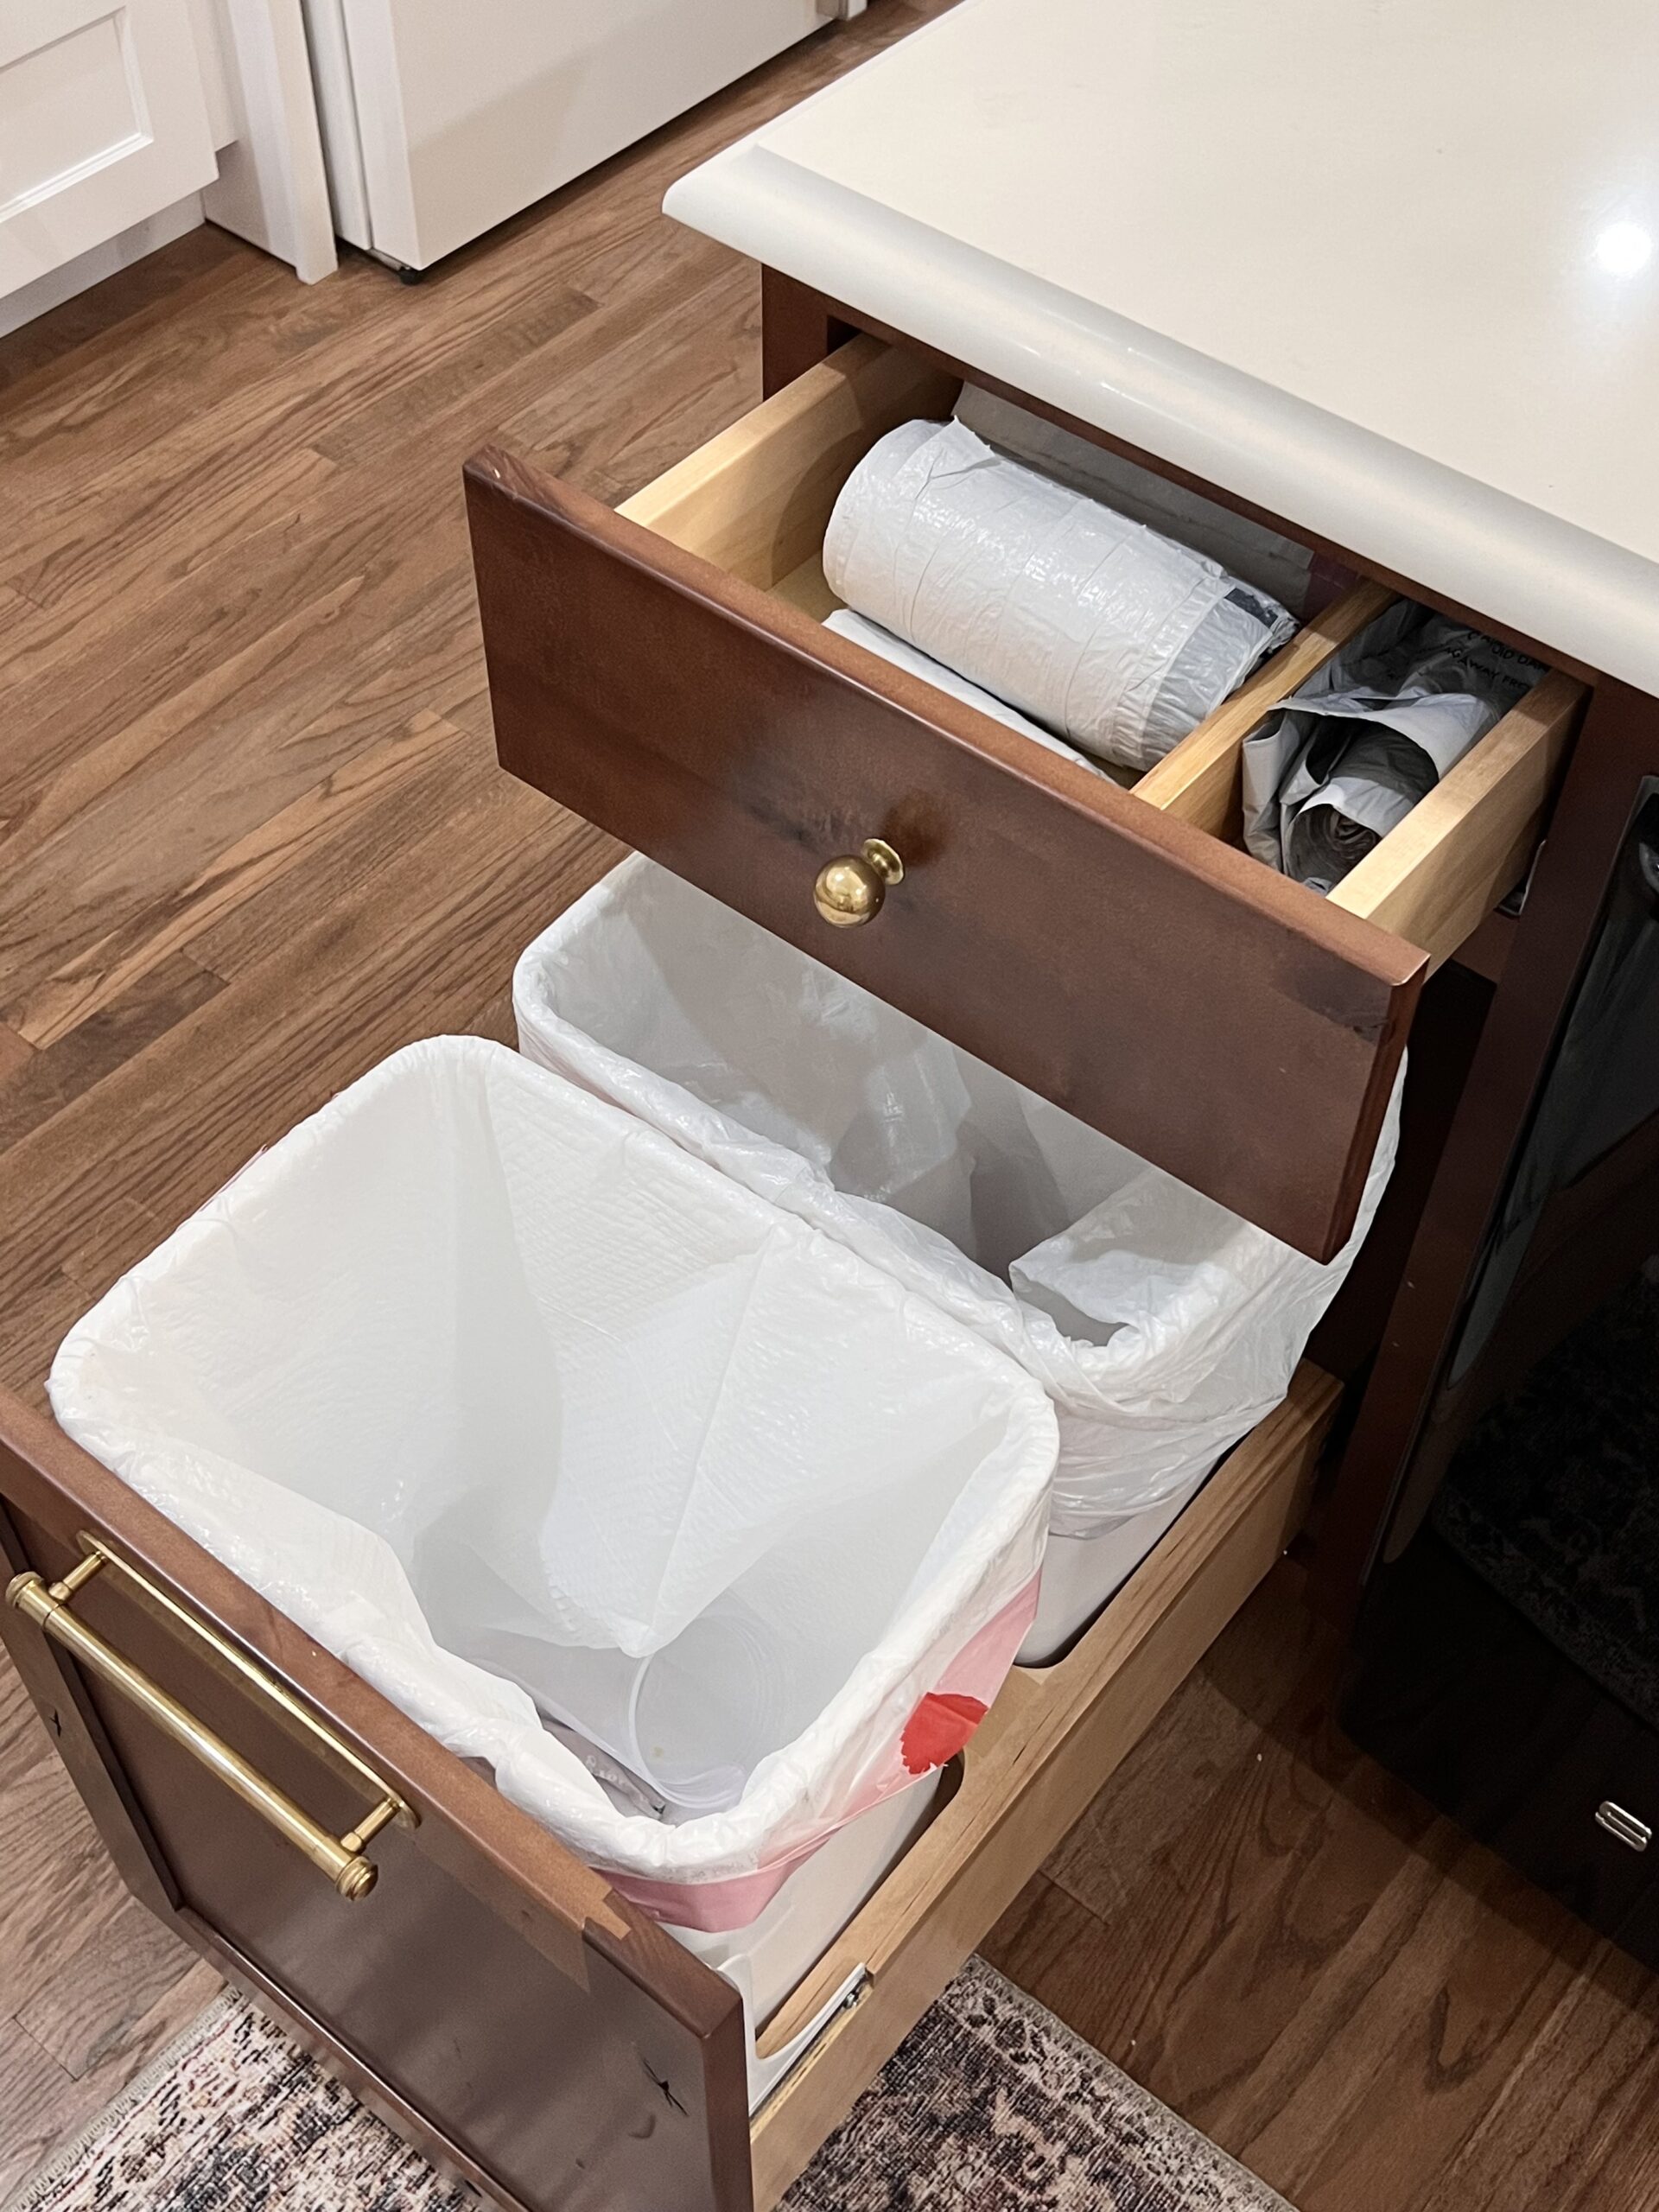 Built-In Organization for Kitchens: 6 Cabinet & Drawer Options We